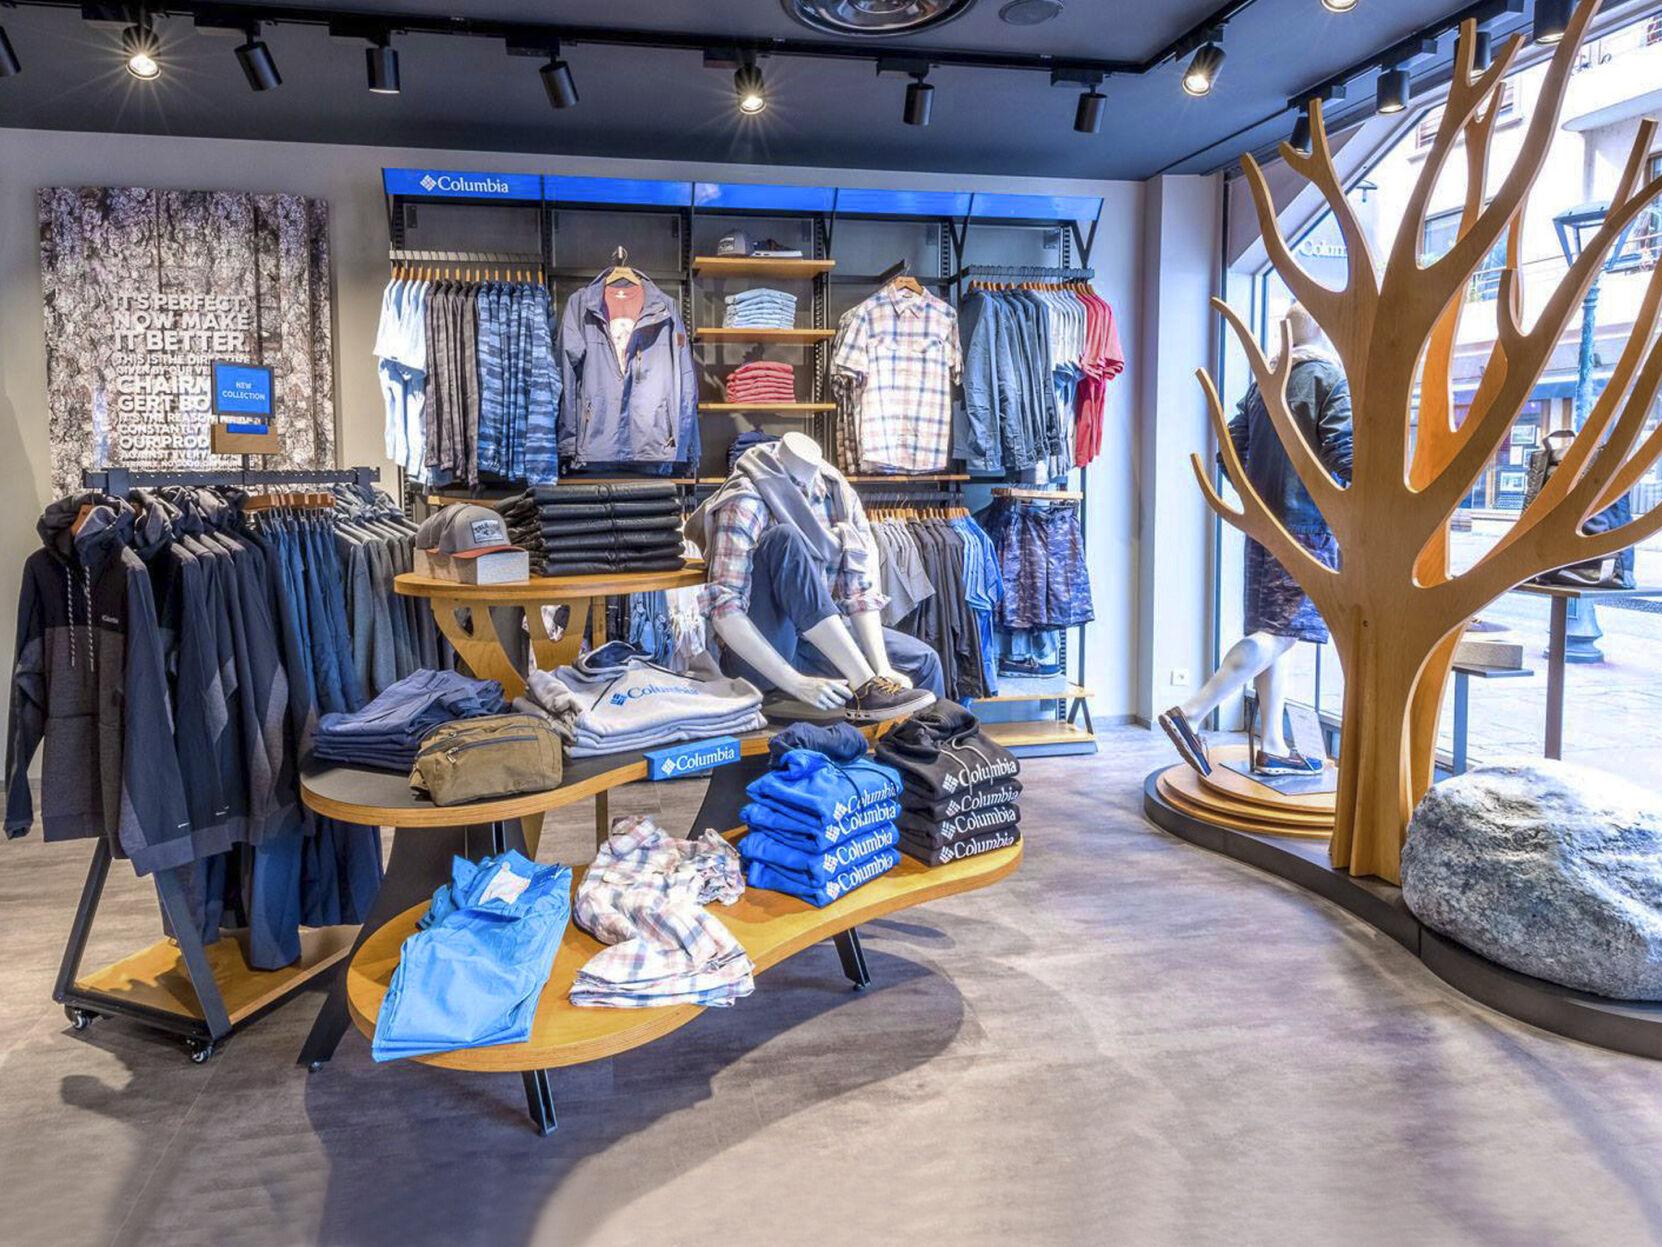 Columbia Sportswear plans state's first store at Louisiana | Business | theadvocate.com